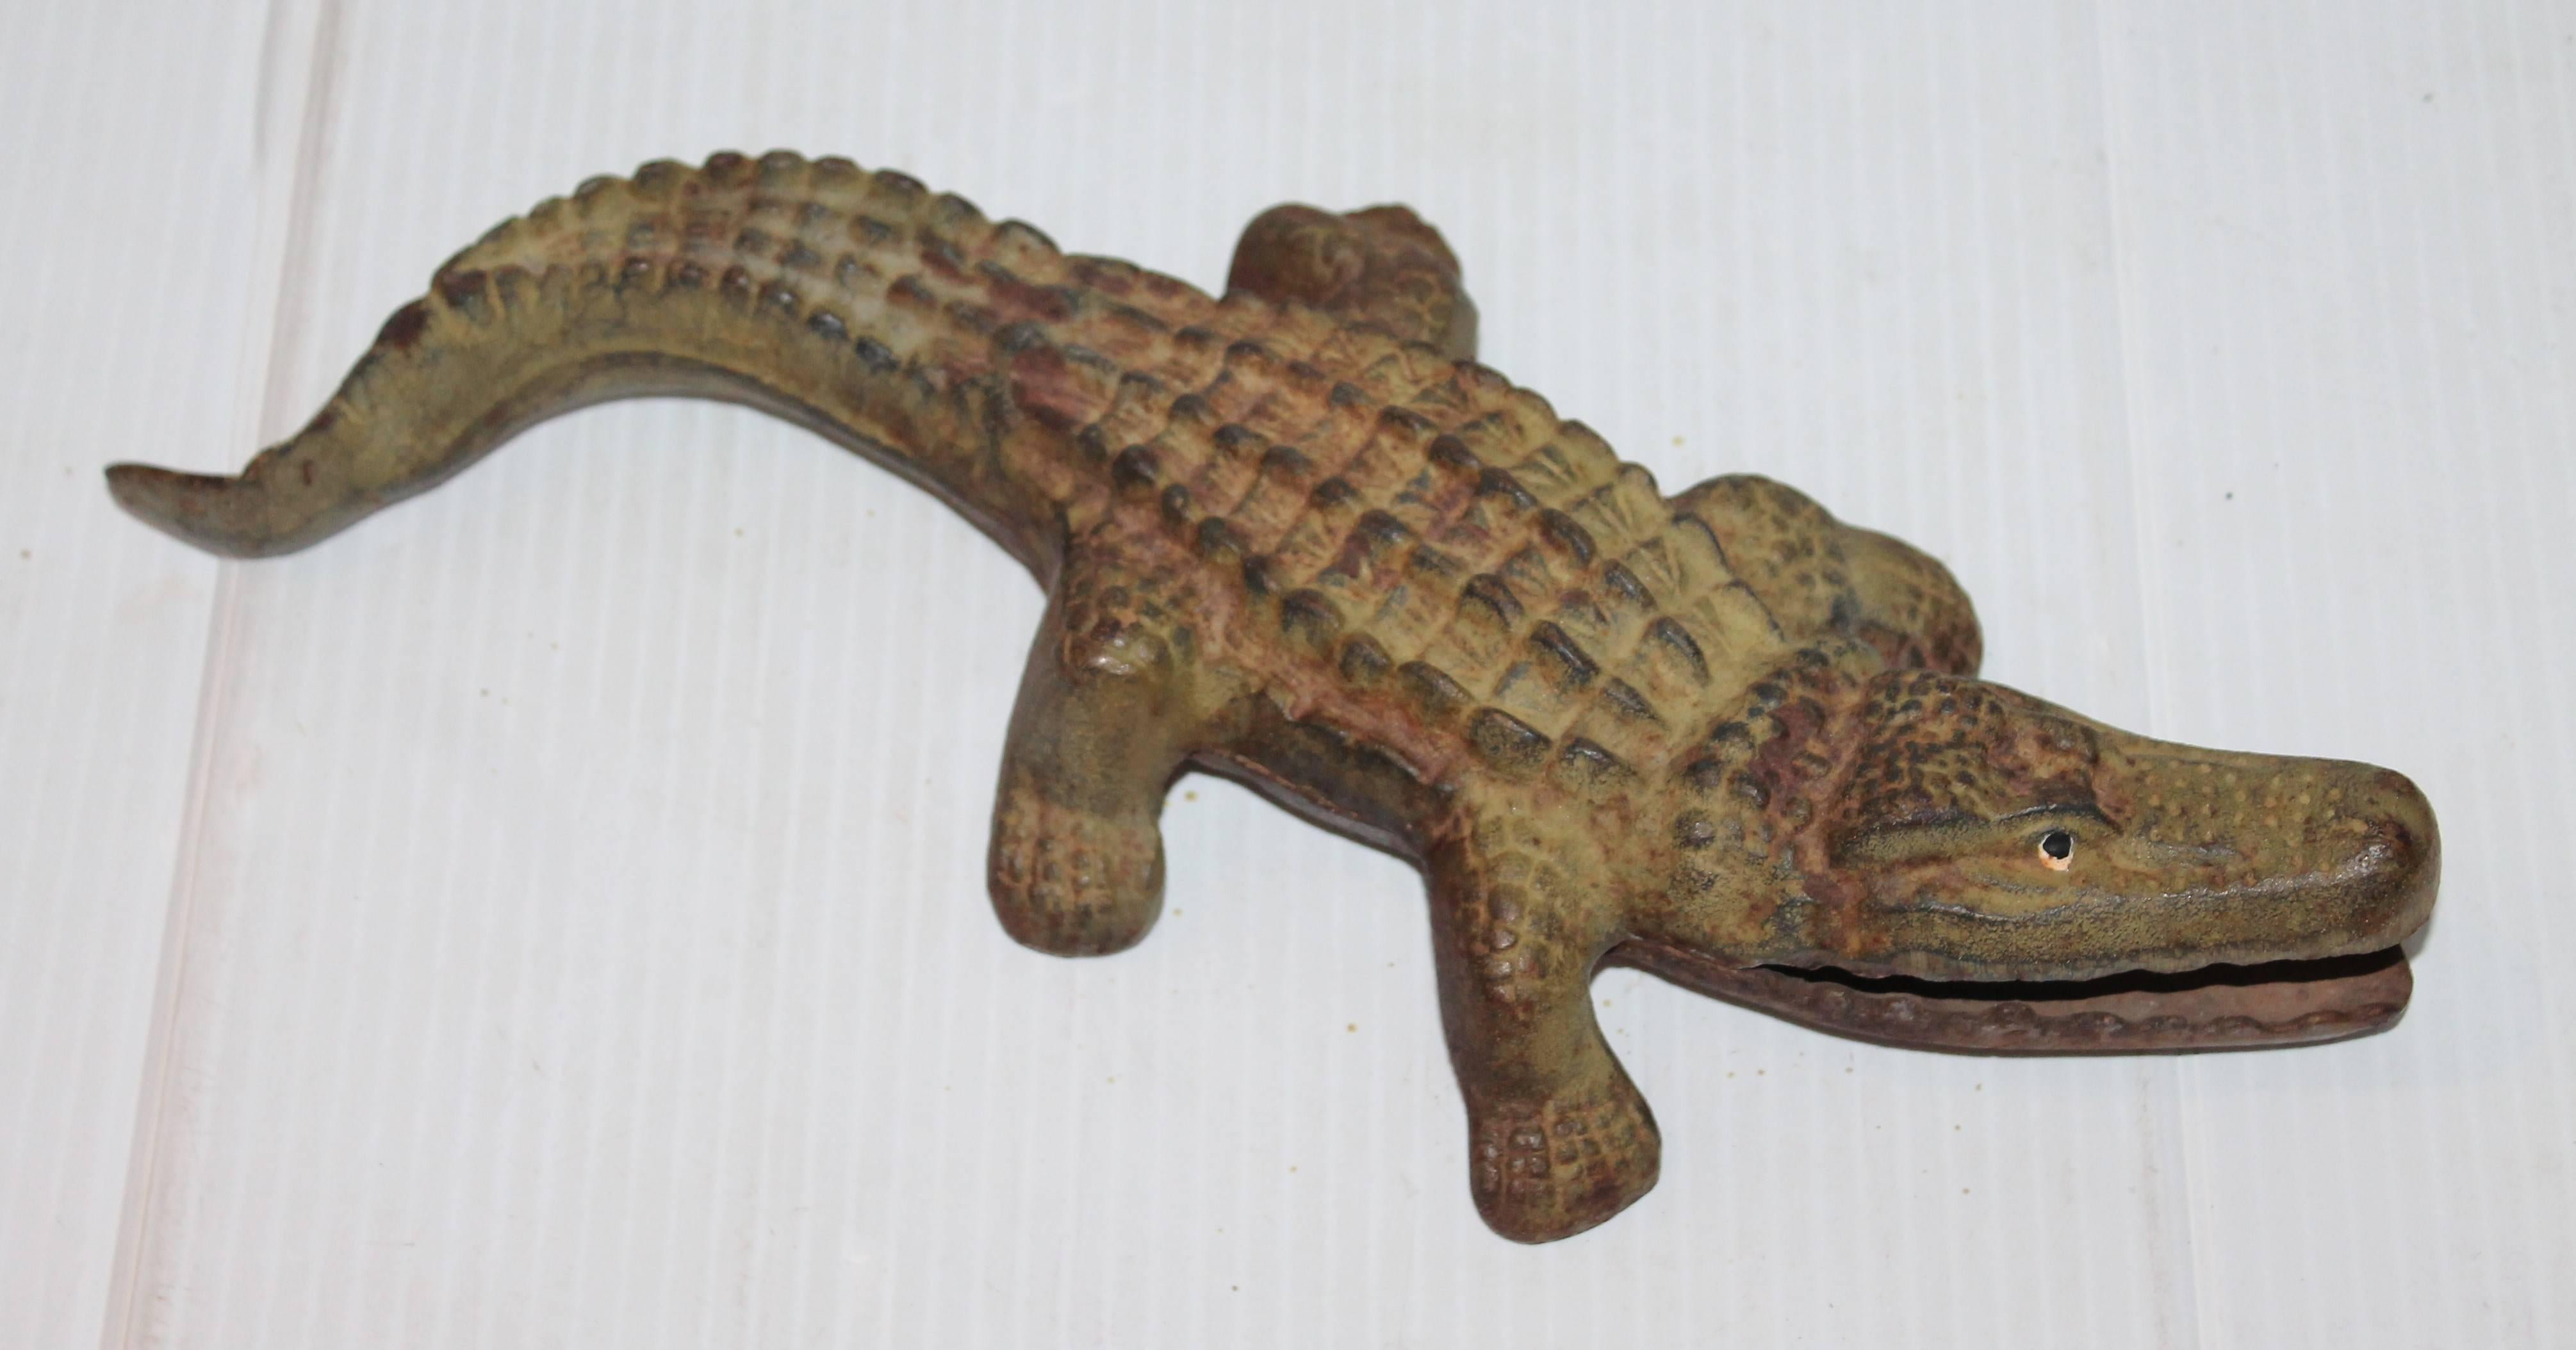 This fun cast iron alligator has a cram painted belly and sage green painted torso. The condition is very good. He has a lot of weight, like a door stop.